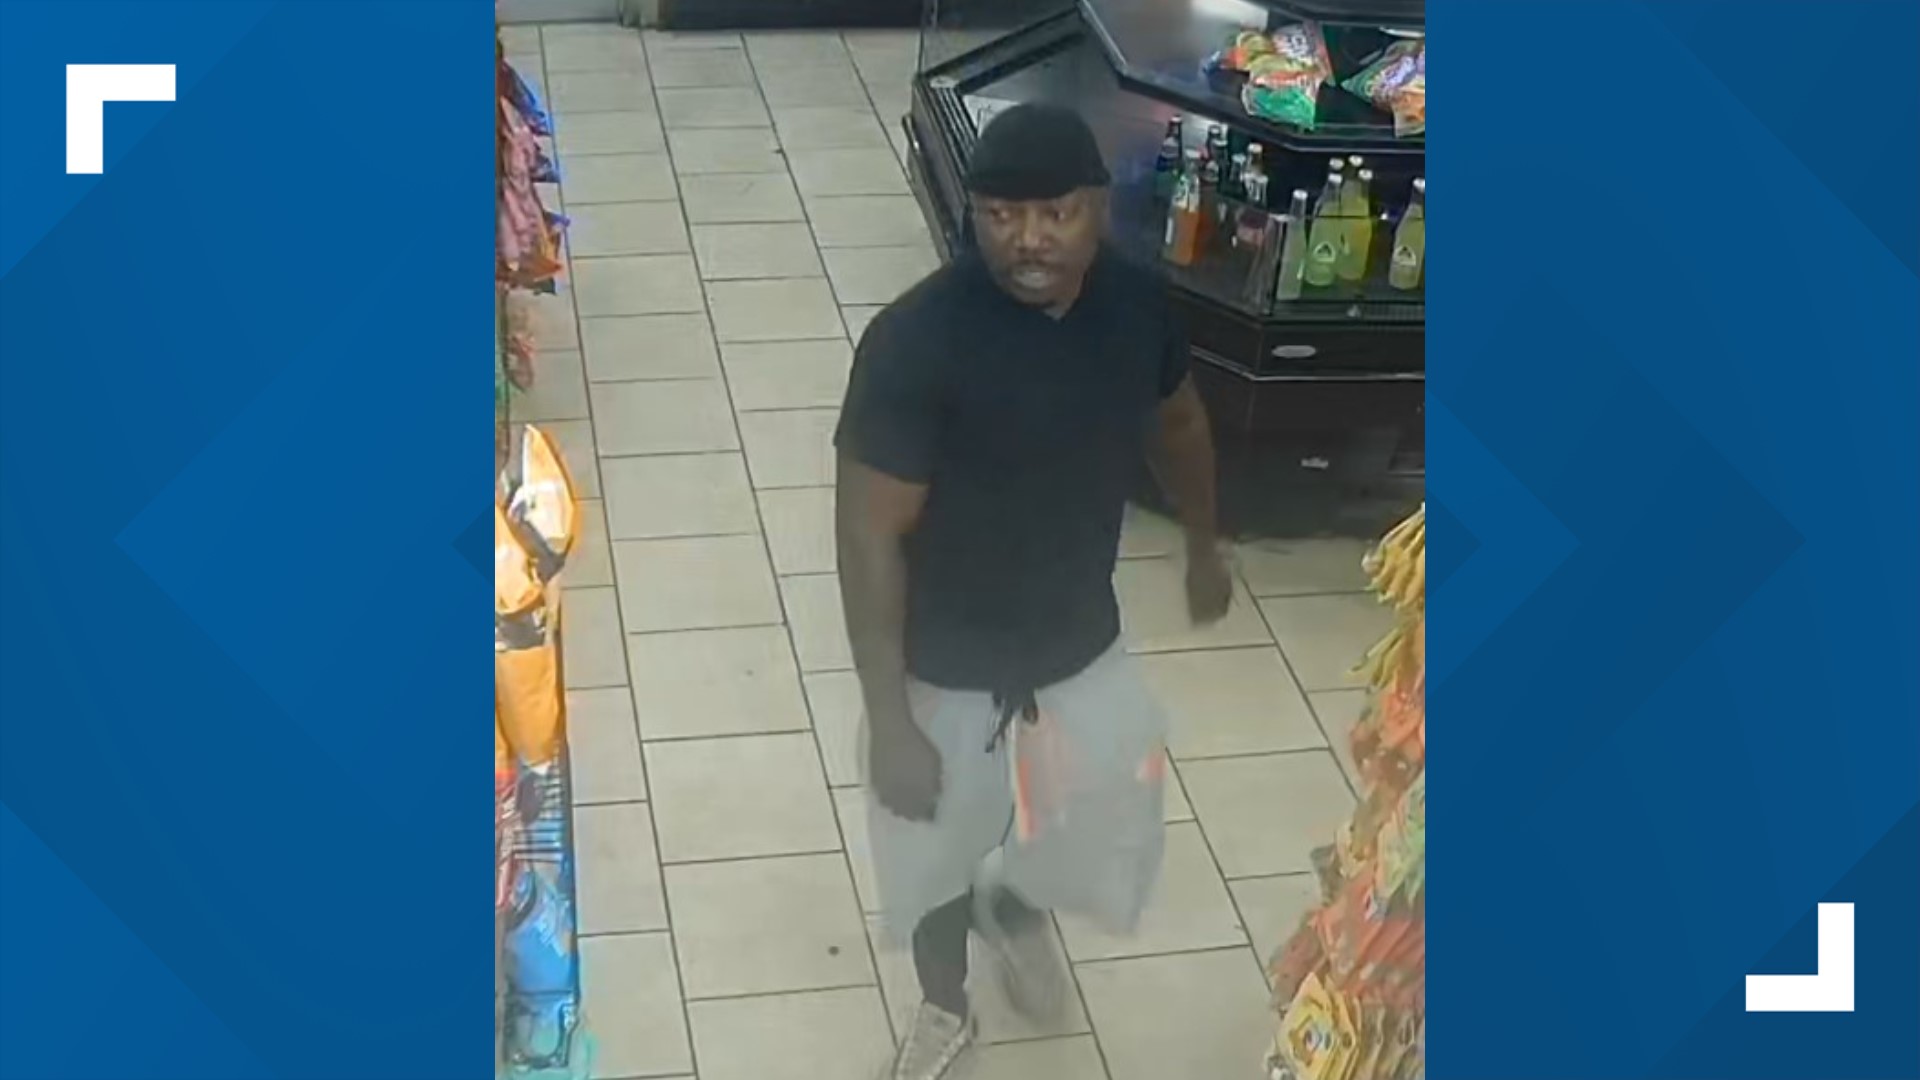 The video shows the man inside the gas station at  3657 Martin Luther King Jr Dr. NW, APD said, before the shooting happened on July 17.